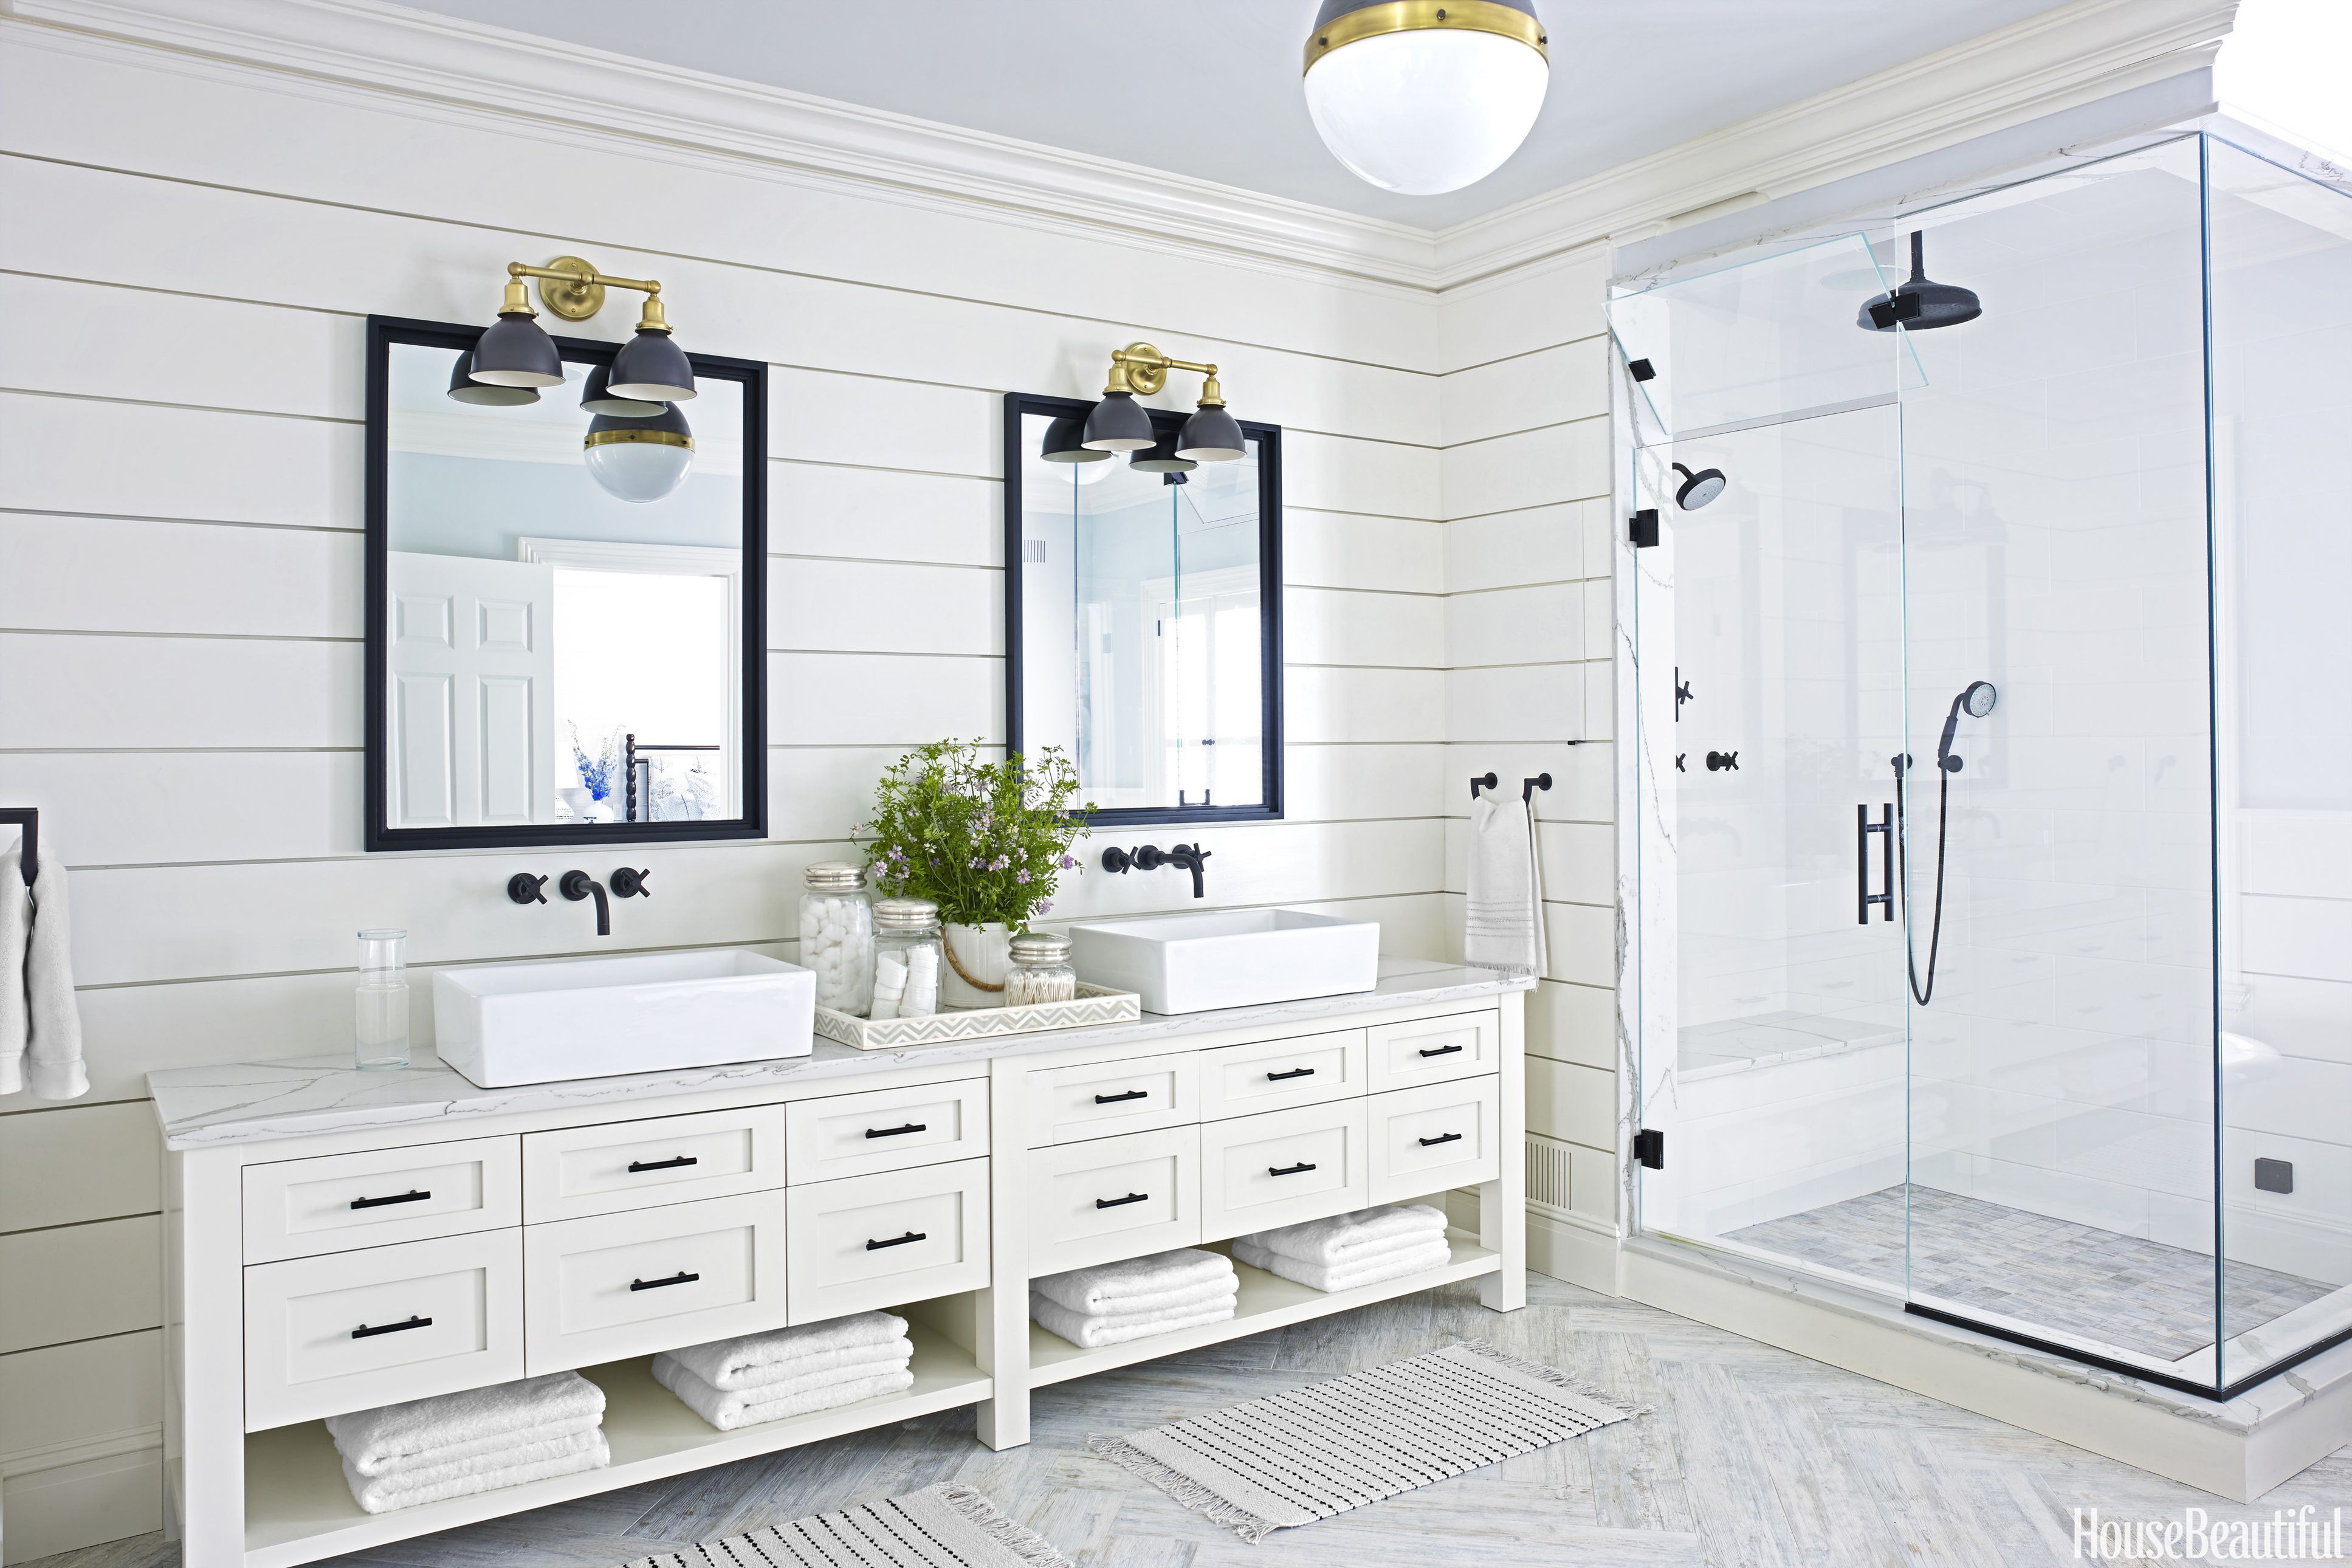 15 Black And White Bathroom Ideas, Black And White Bathroom Pictures